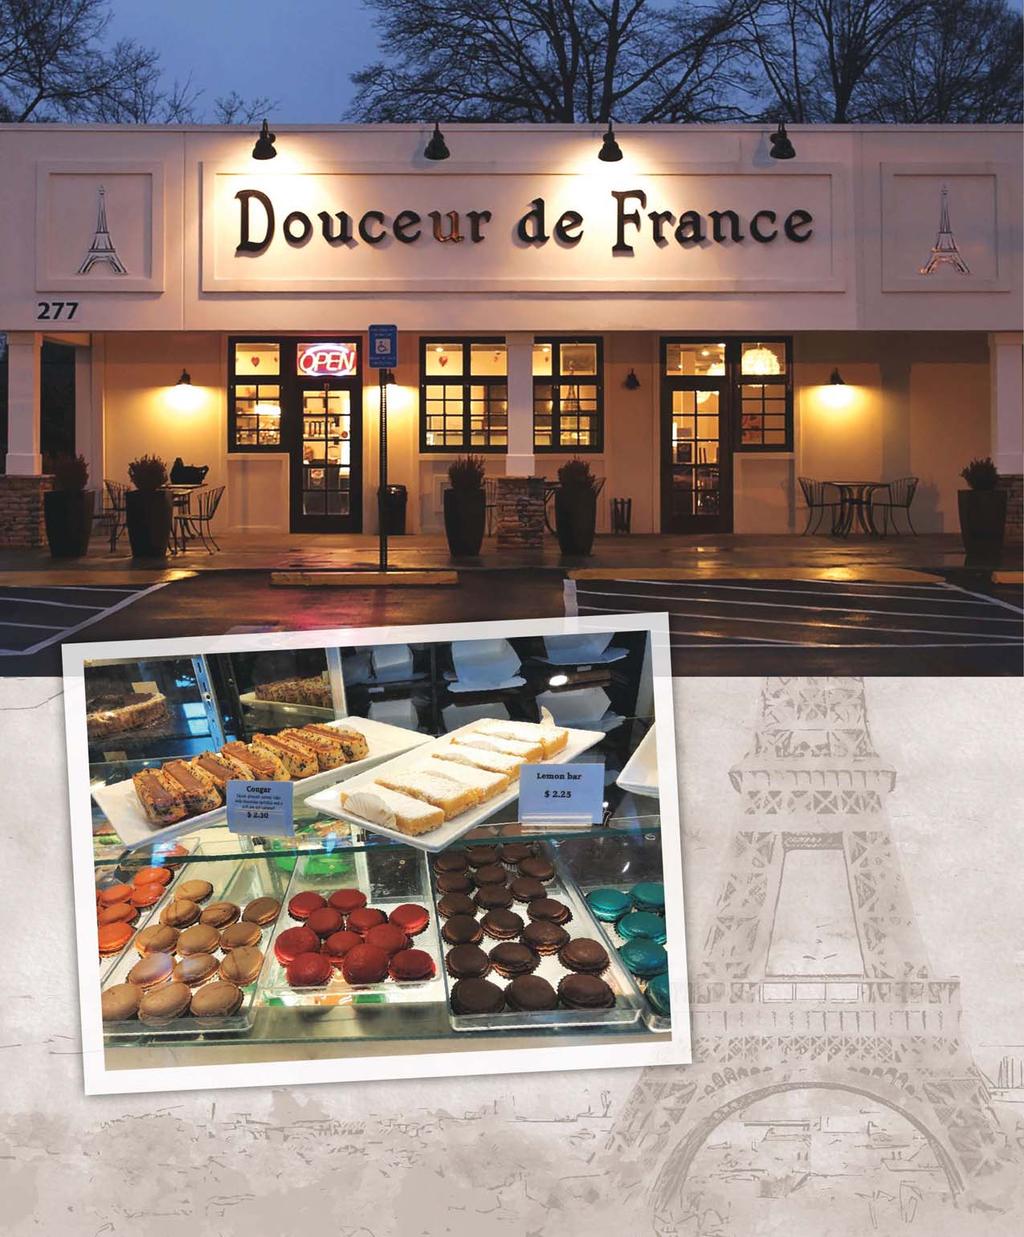 44 COBB LIFE JANUARY/FEBRUARY 2019 Douceur de France is located at 277 South Marietta